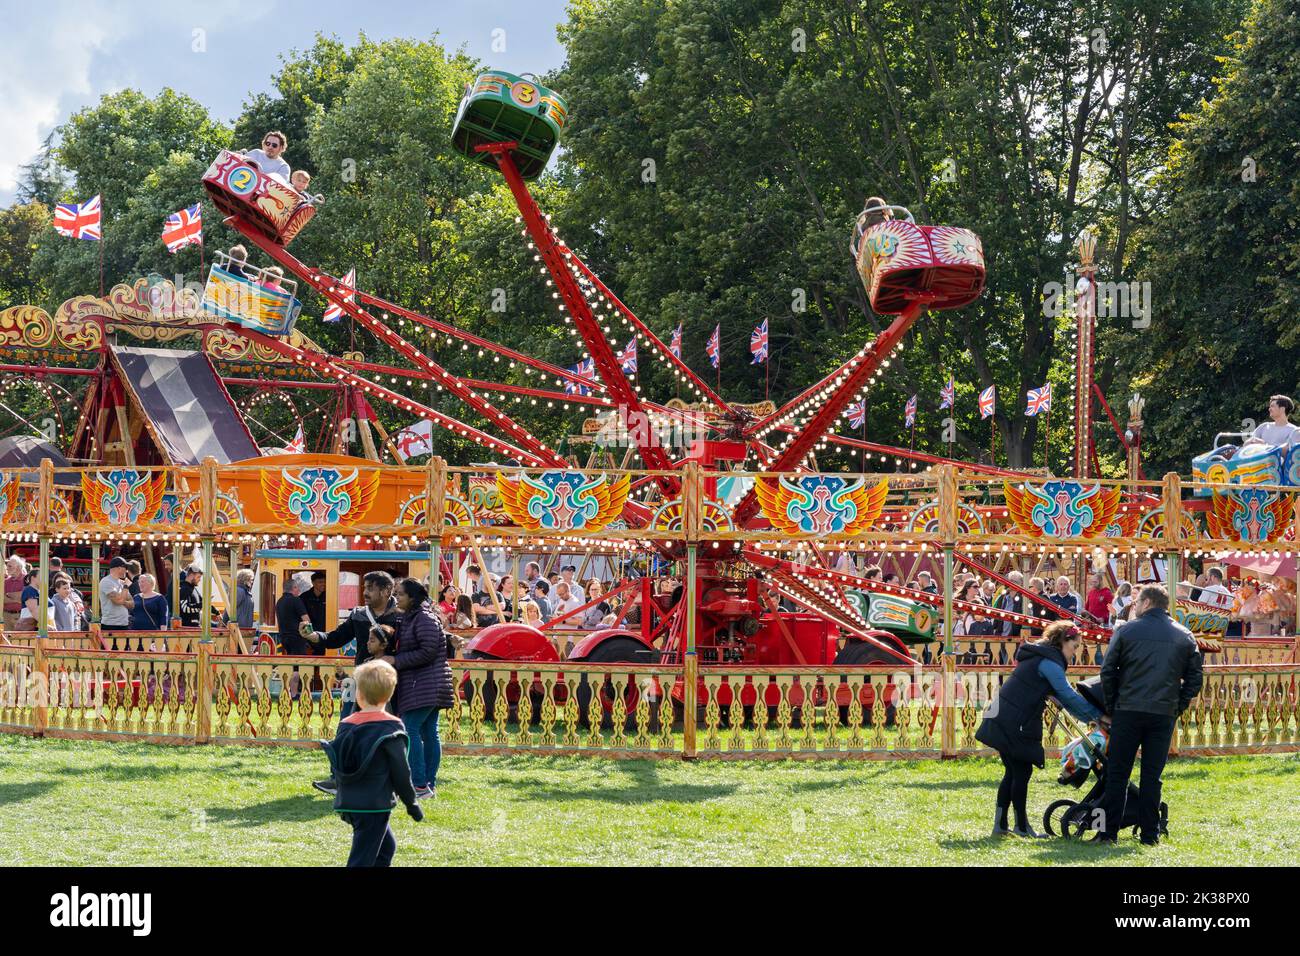 The Octopus ride at Carters Vintage Steam Funfair on its last tour, Basingstoke War Memorial Park, September 24 2022. Hampshire, England Stock Photo